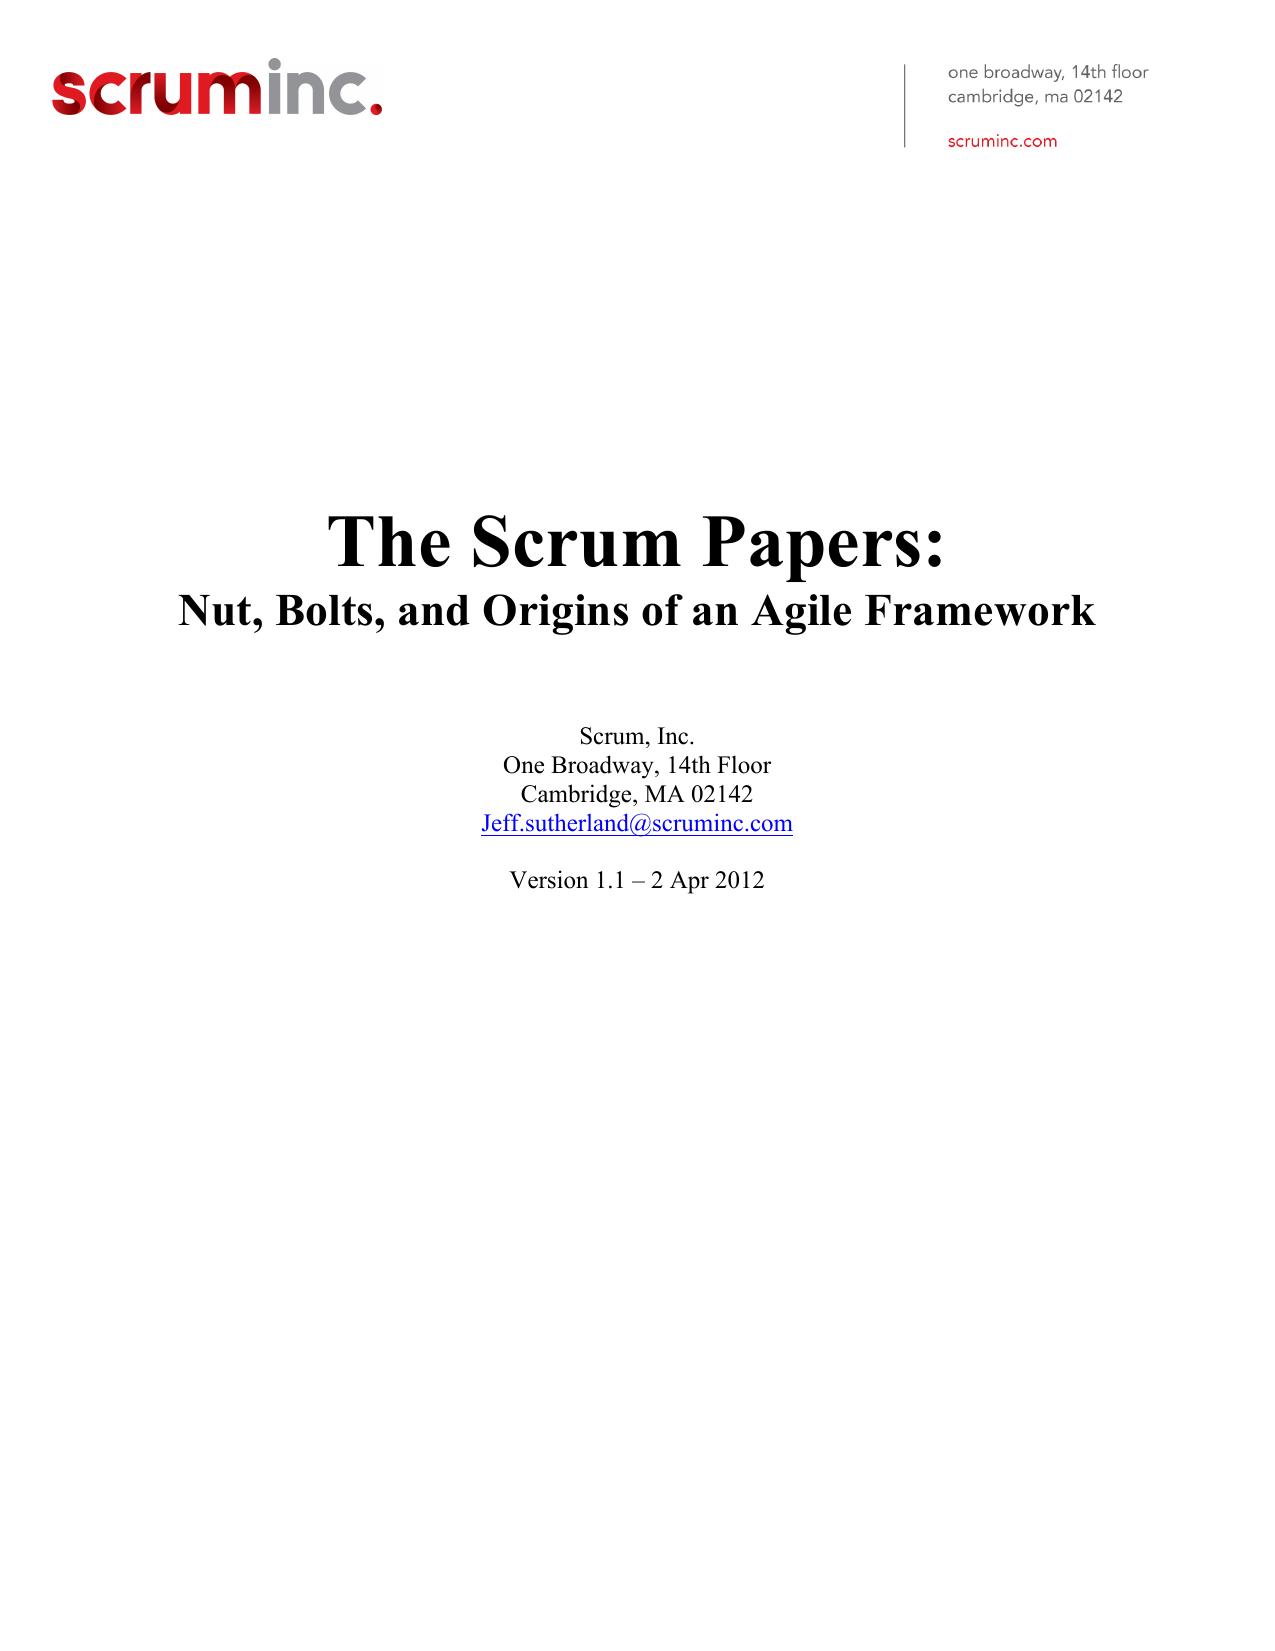 The Scrum Papers - Nut, Bolts, and Origins of an Agile Framework